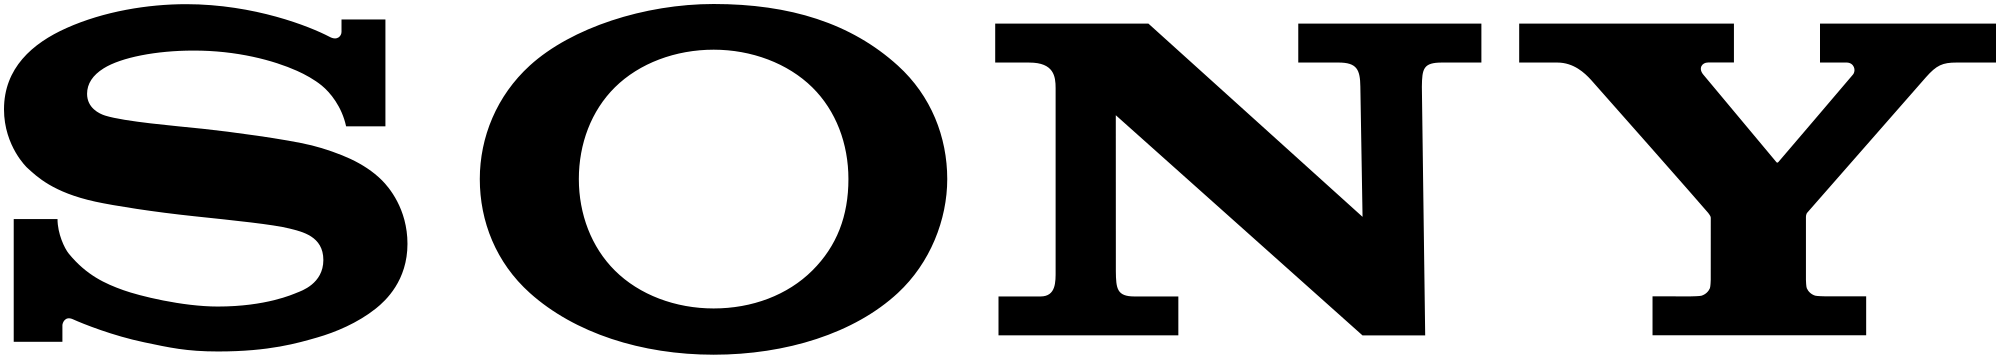 sony_logo_PNG7.png